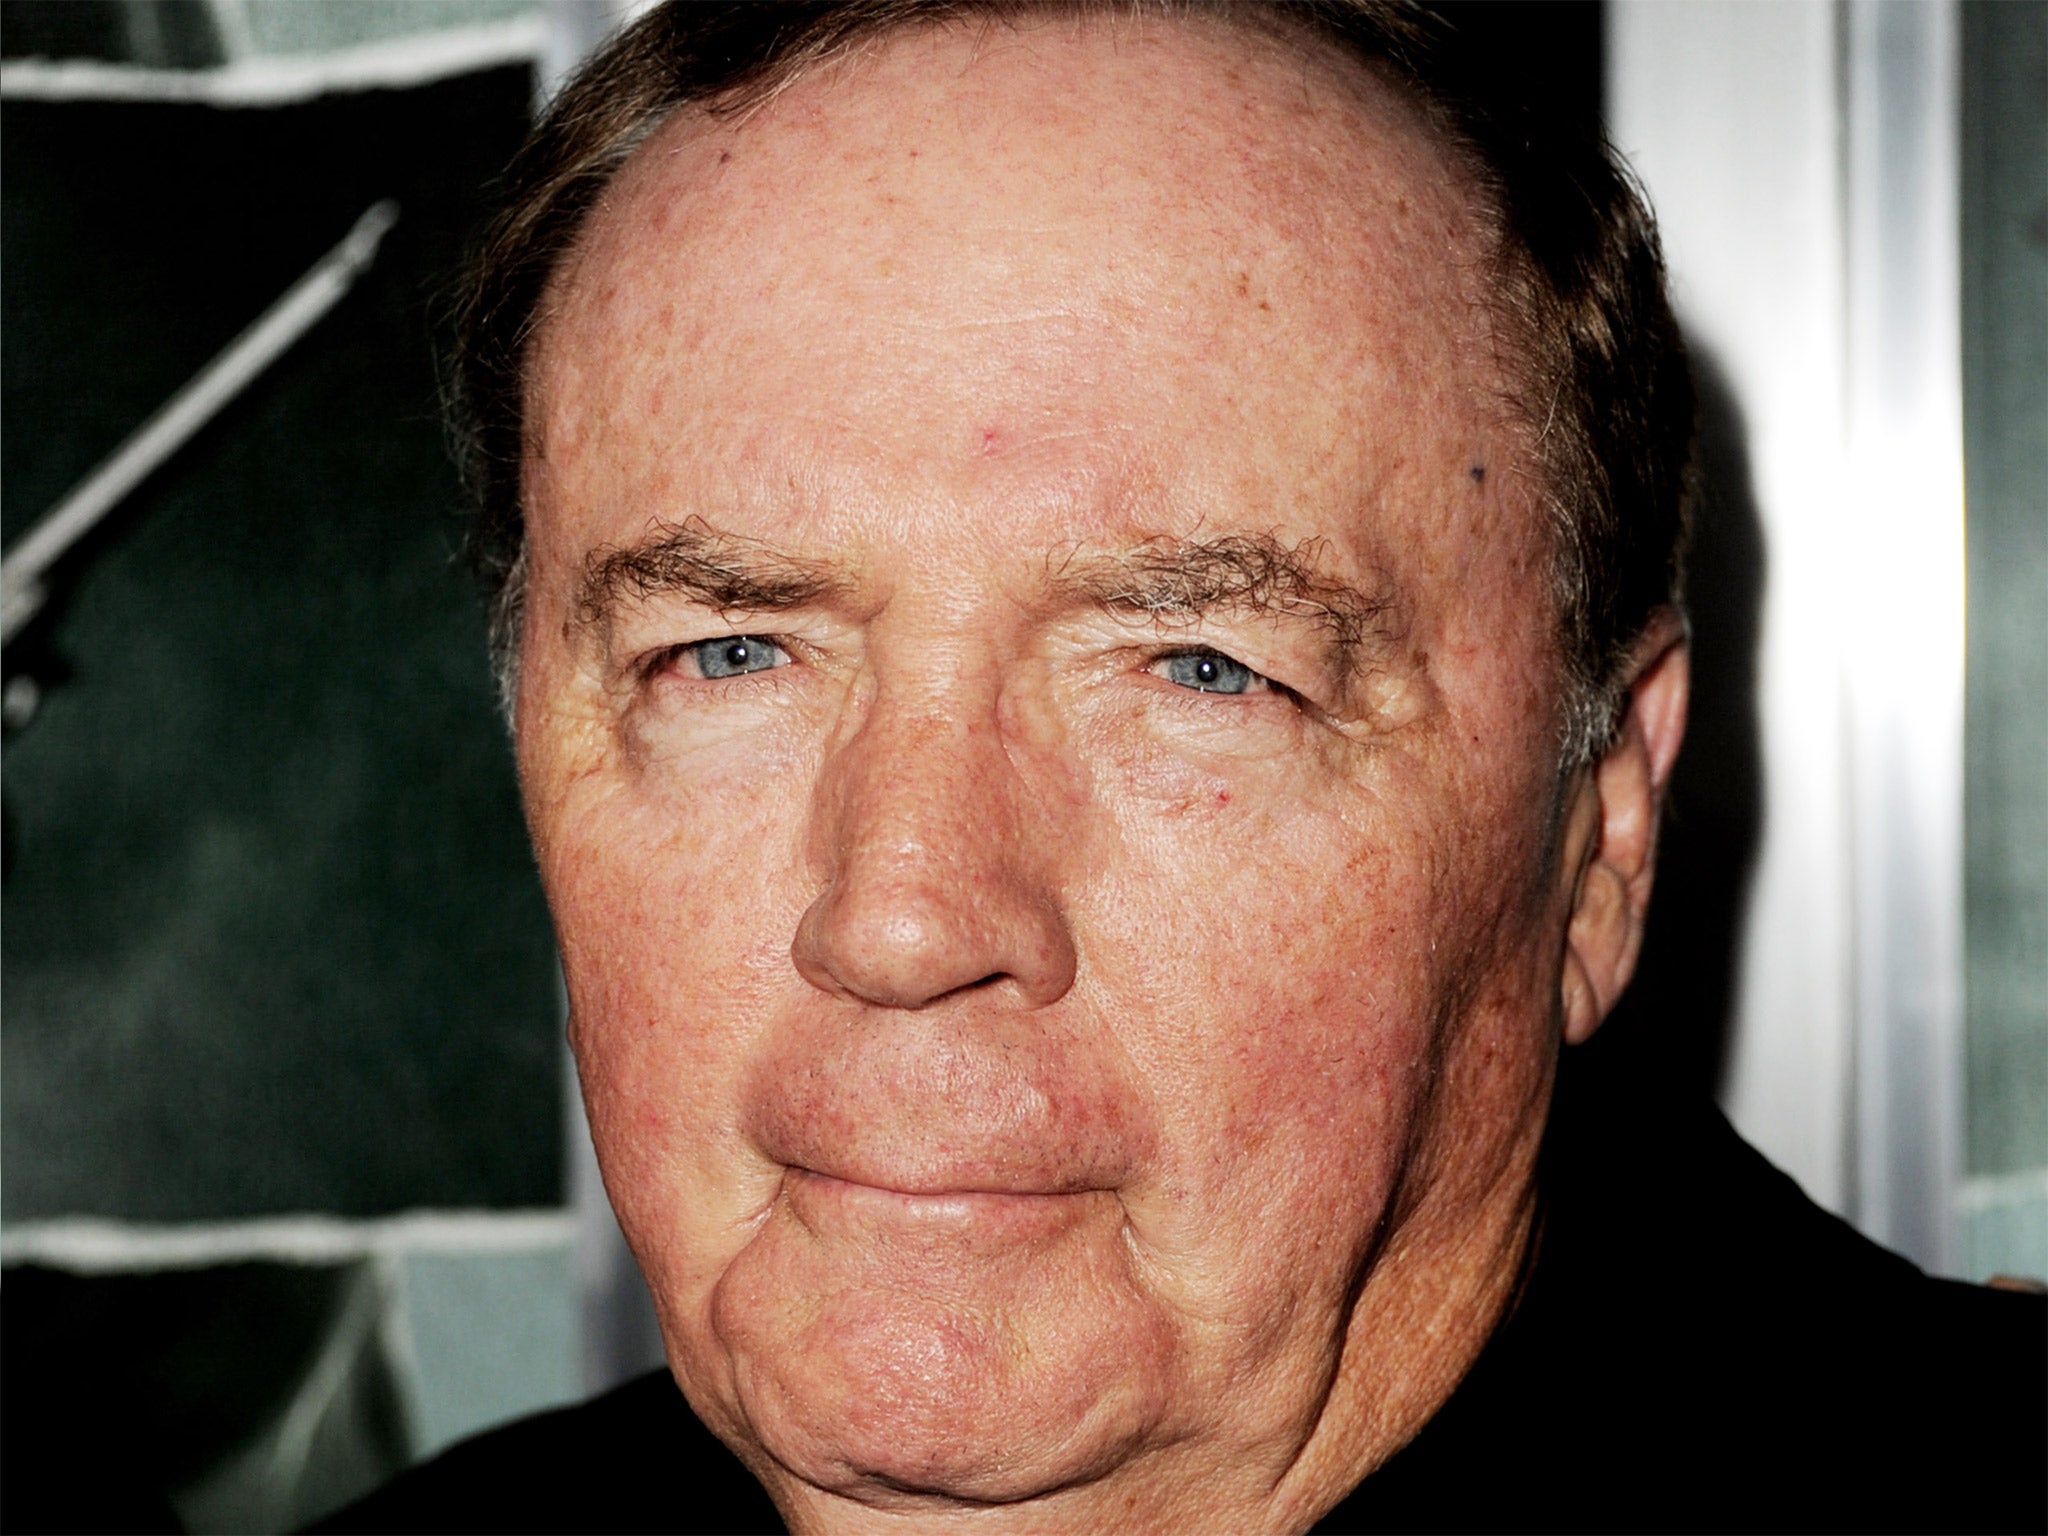 James Patterson is the world’s wealthiest author